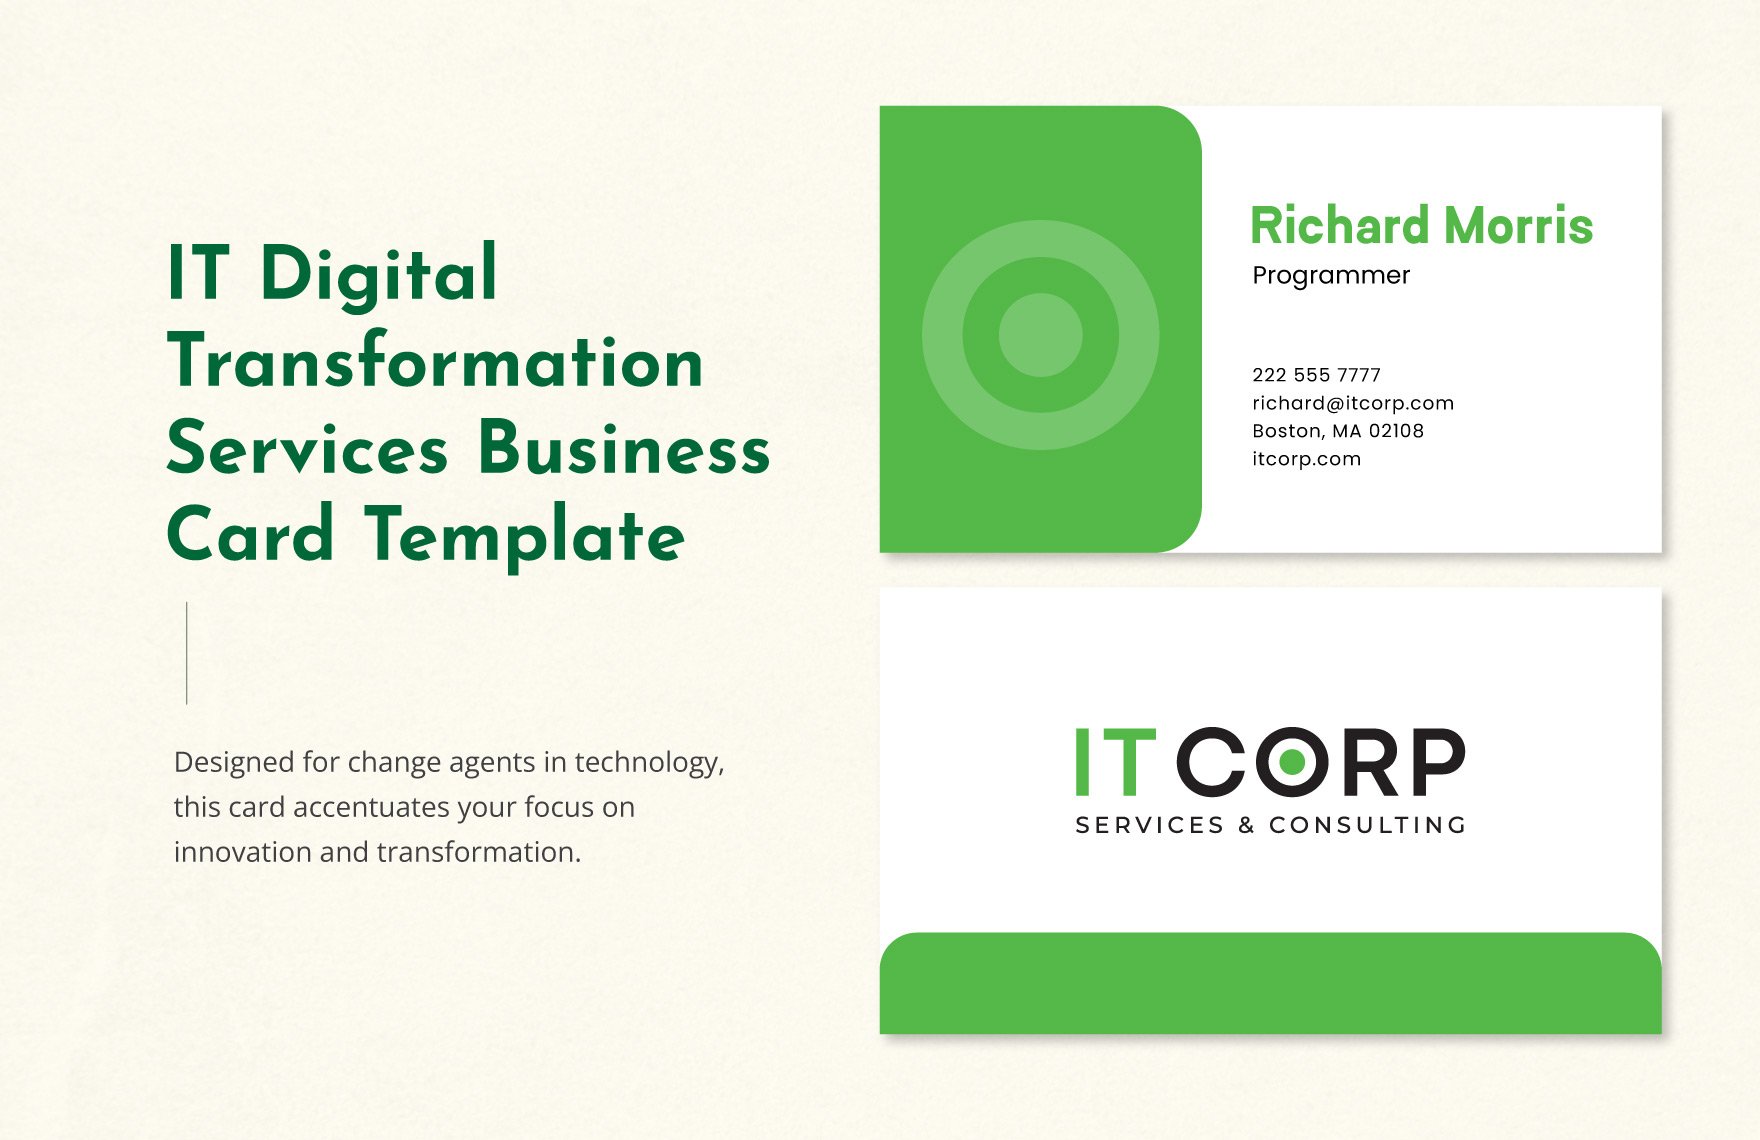 IT Digital Transformation Services Business Card Template in Word, Illustrator, PSD